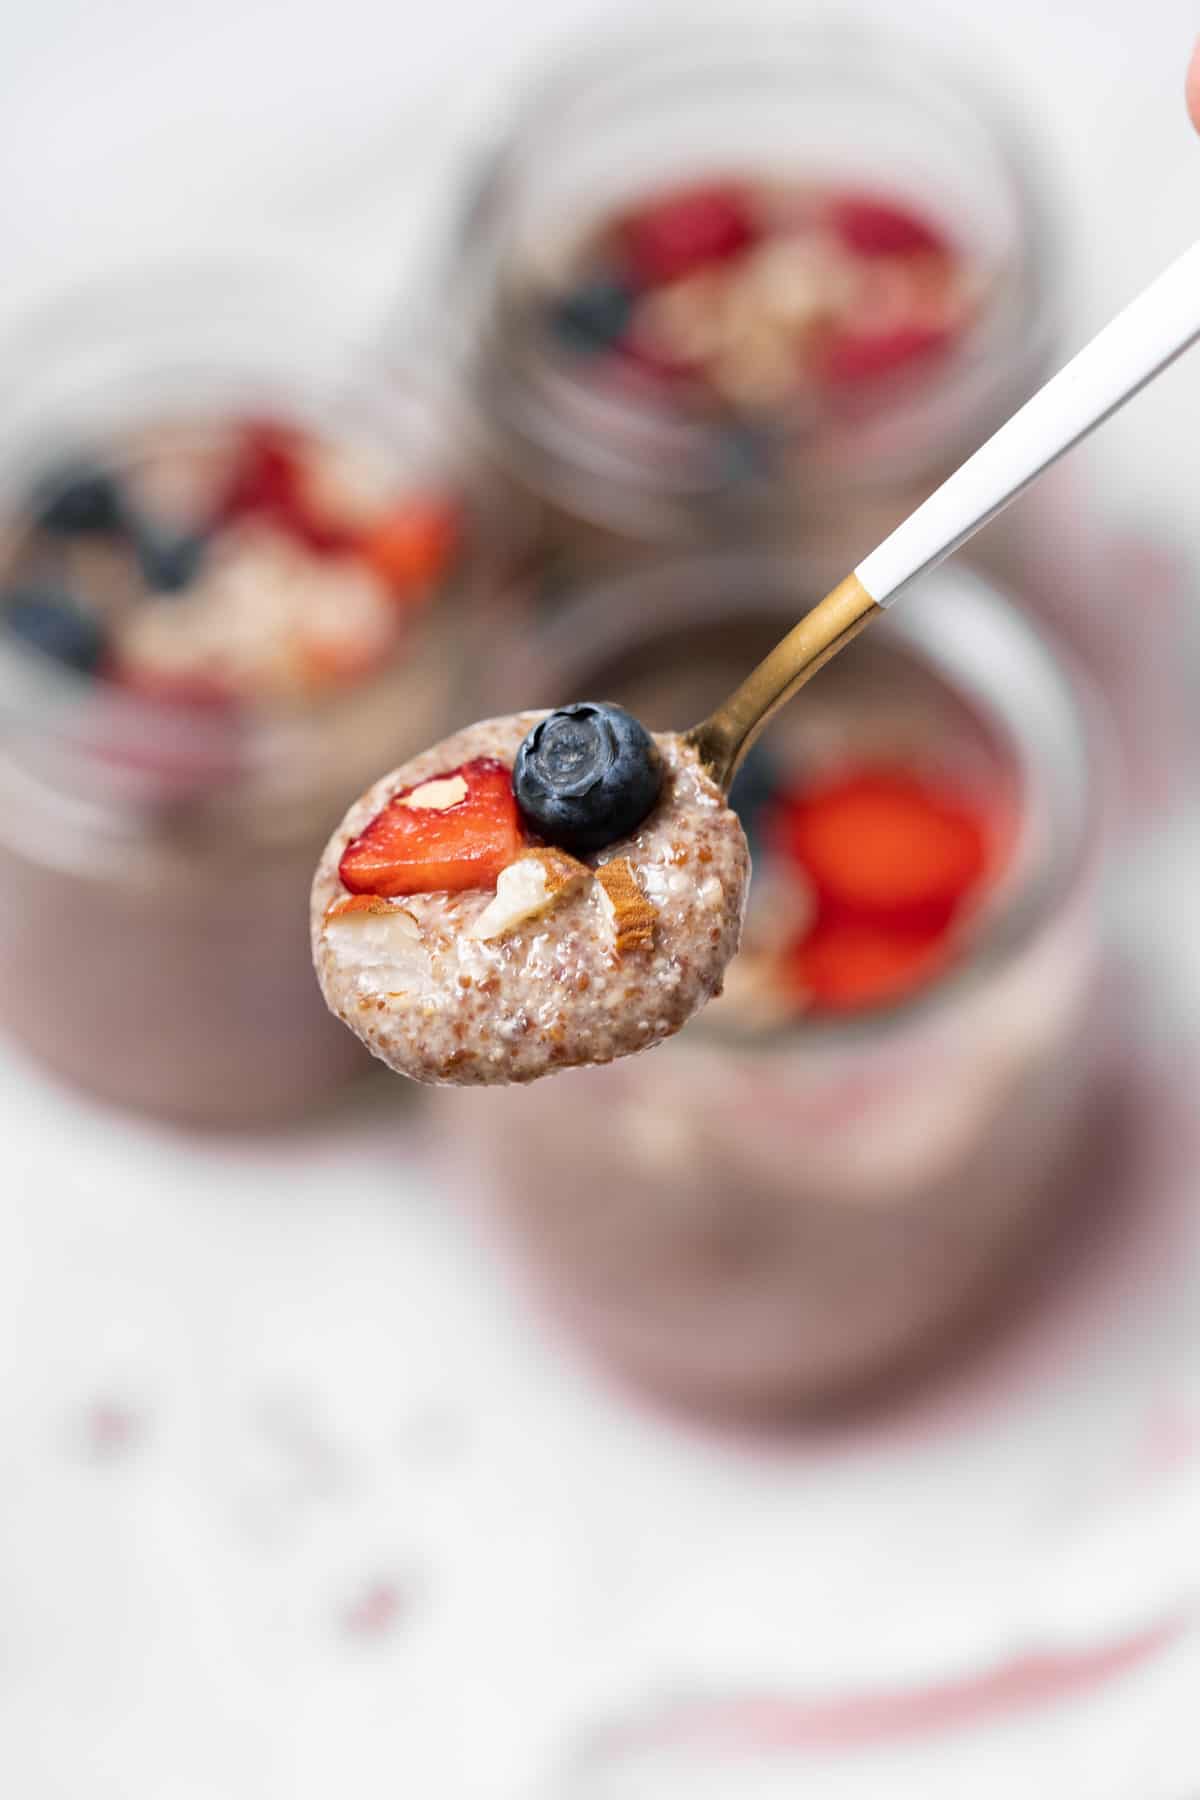 A spoonful of flaxseed pudding with chopped nuts and fruit.